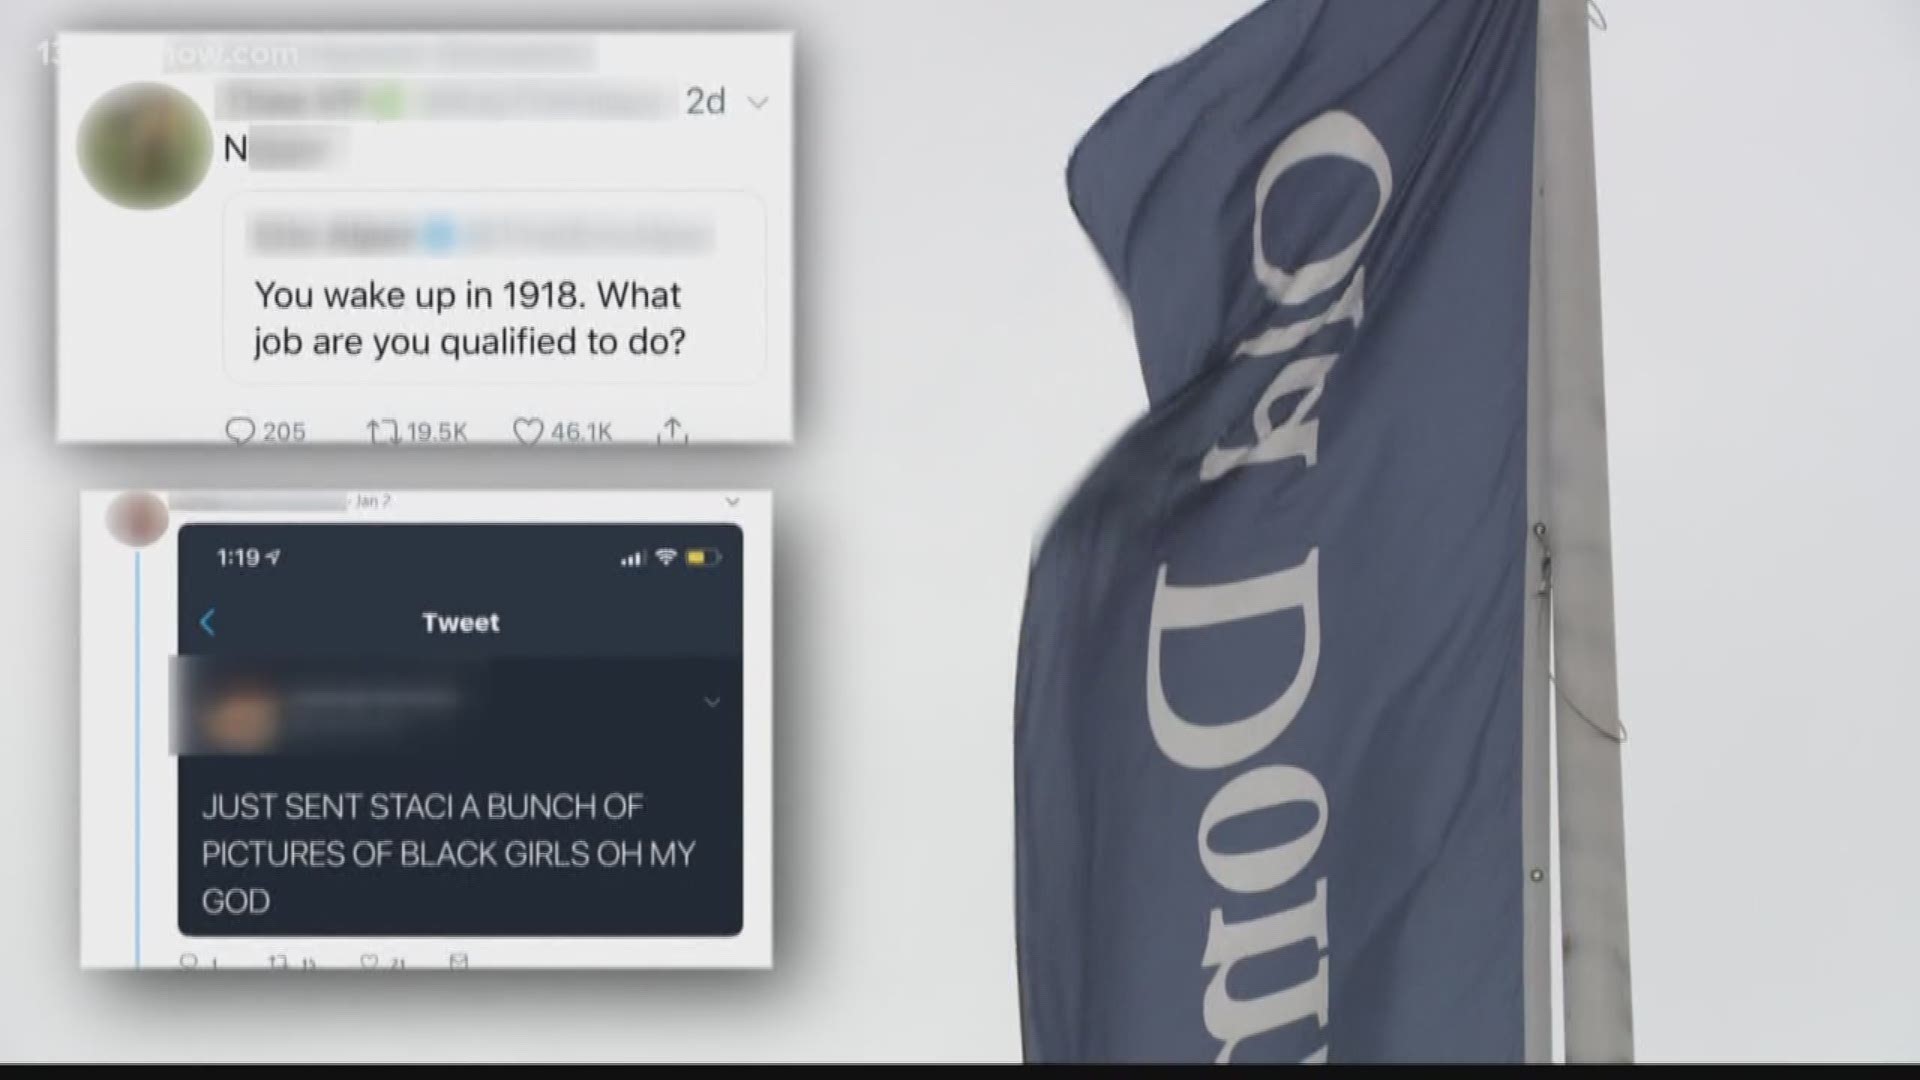 Old Dominion University is reviewing all Greek organizations after Alpha Phi was suspended for racist tweets.